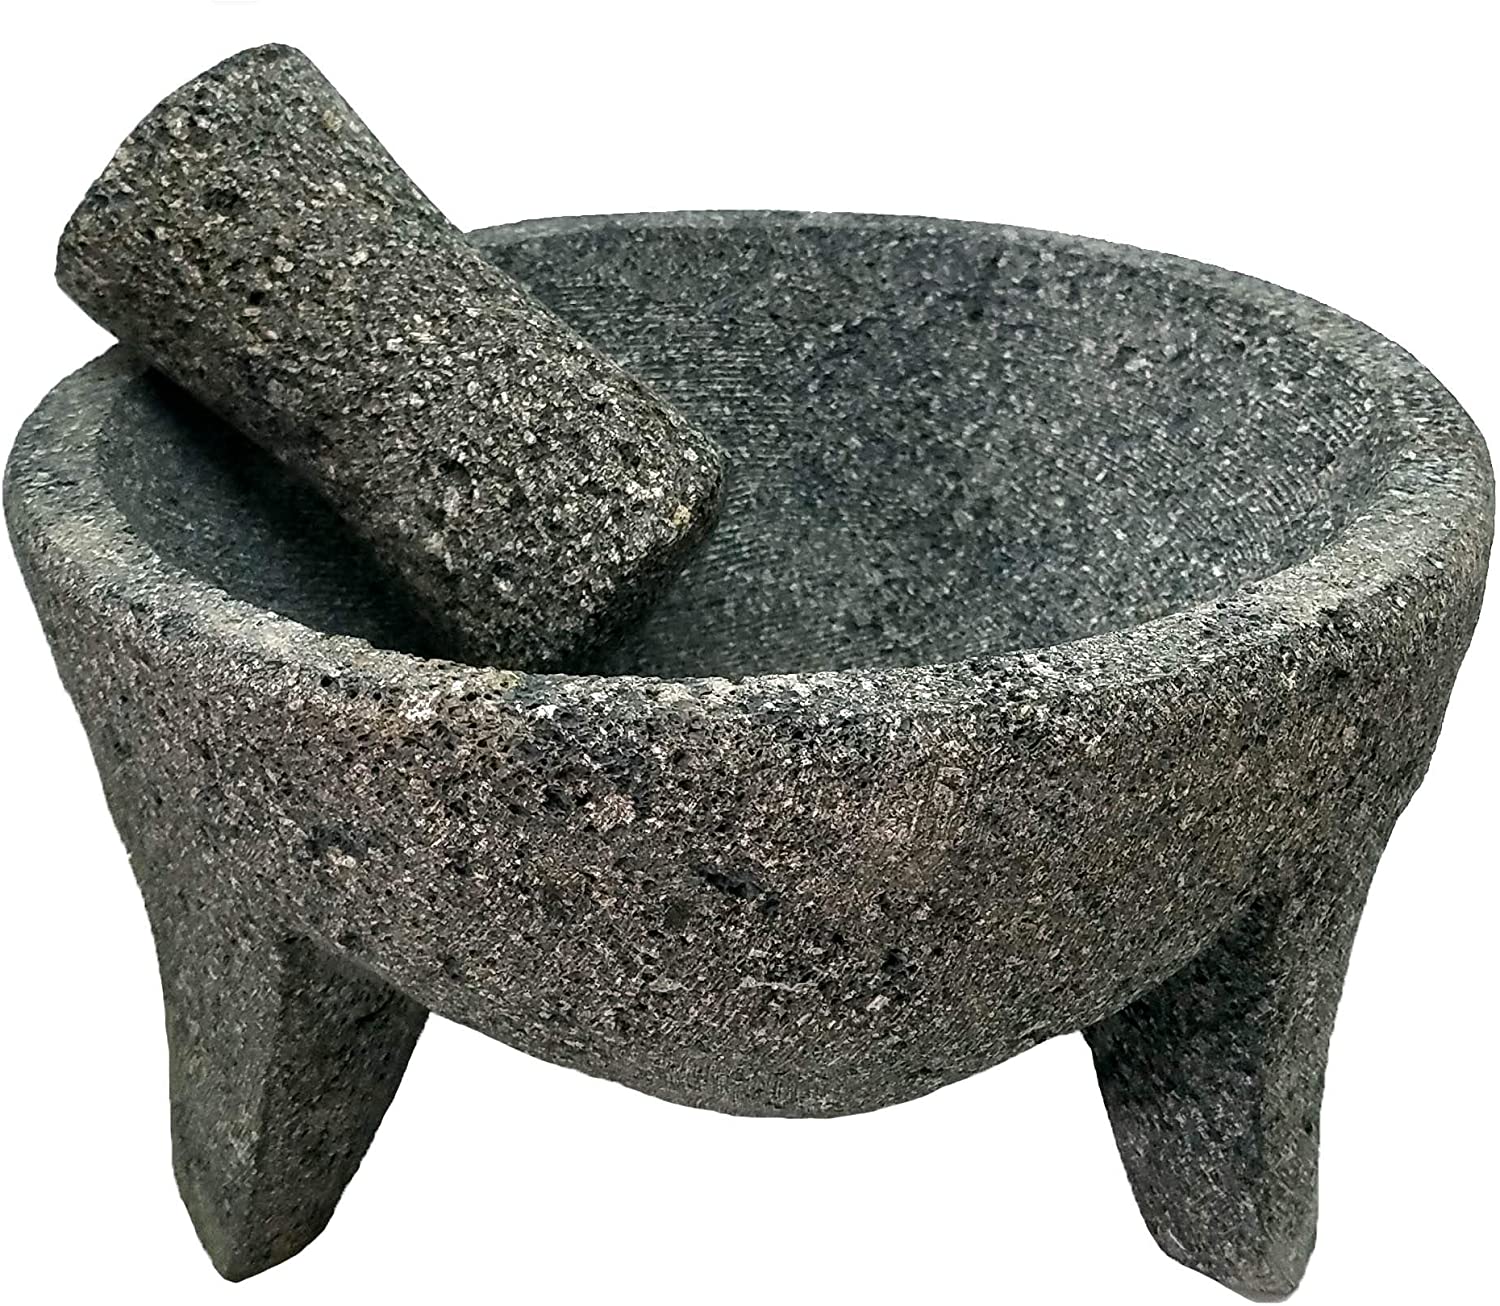 VOLCANIC ROCK PRODUCTS / Classic 8'' Molcajete Mortar and Pestle Set